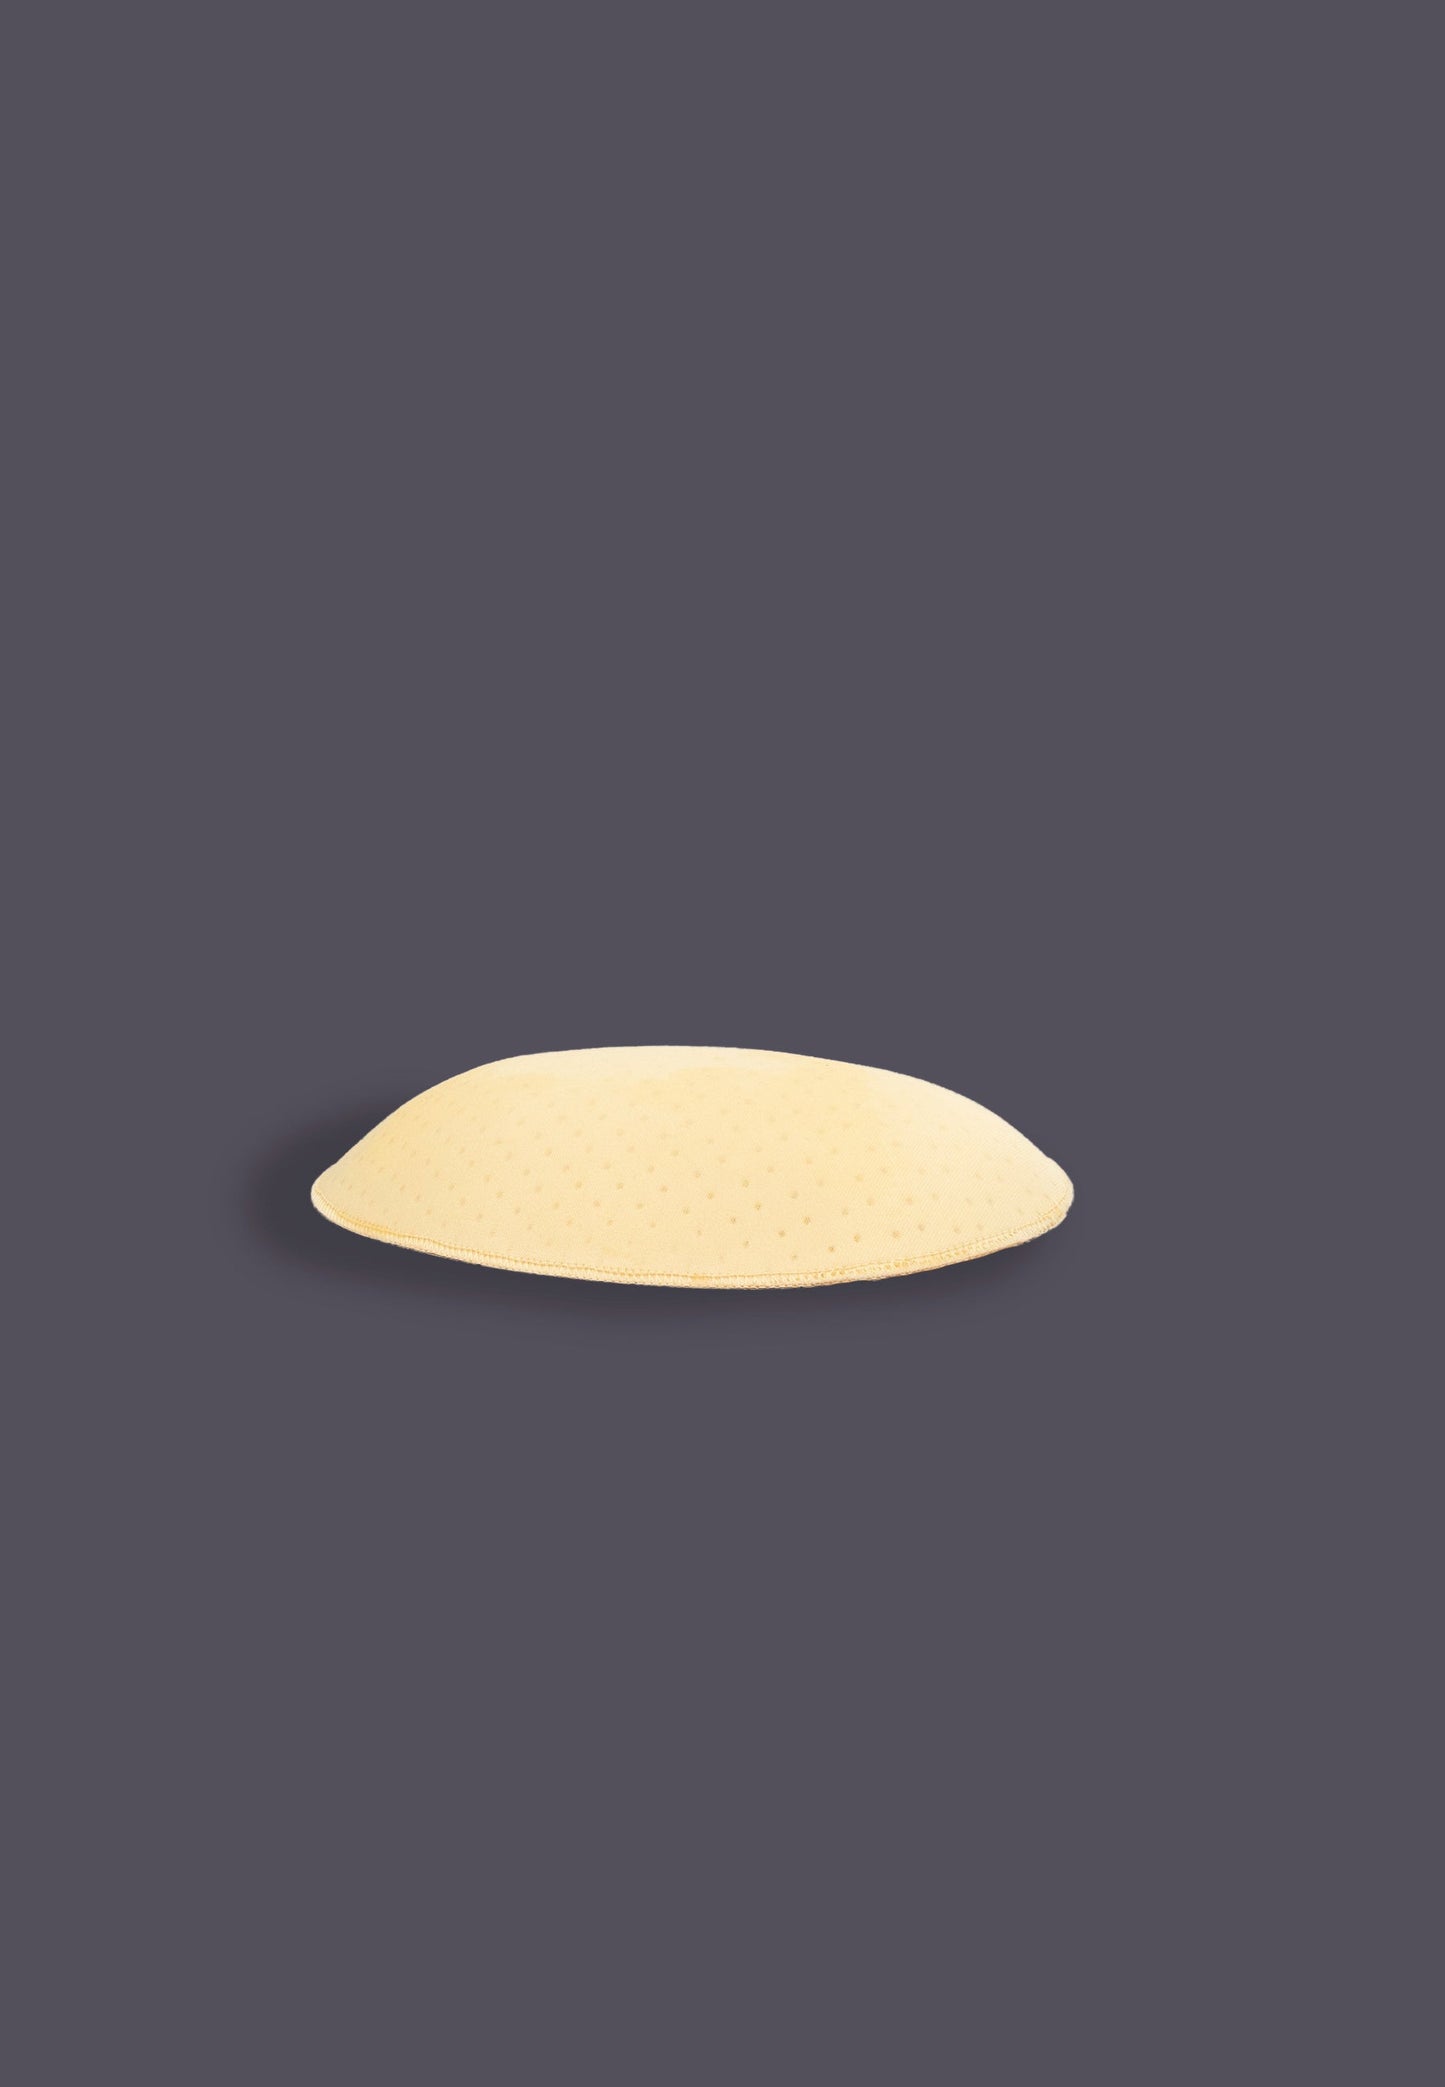 One of the Foam Self-Adhesive Hip Pads beige seen from the side